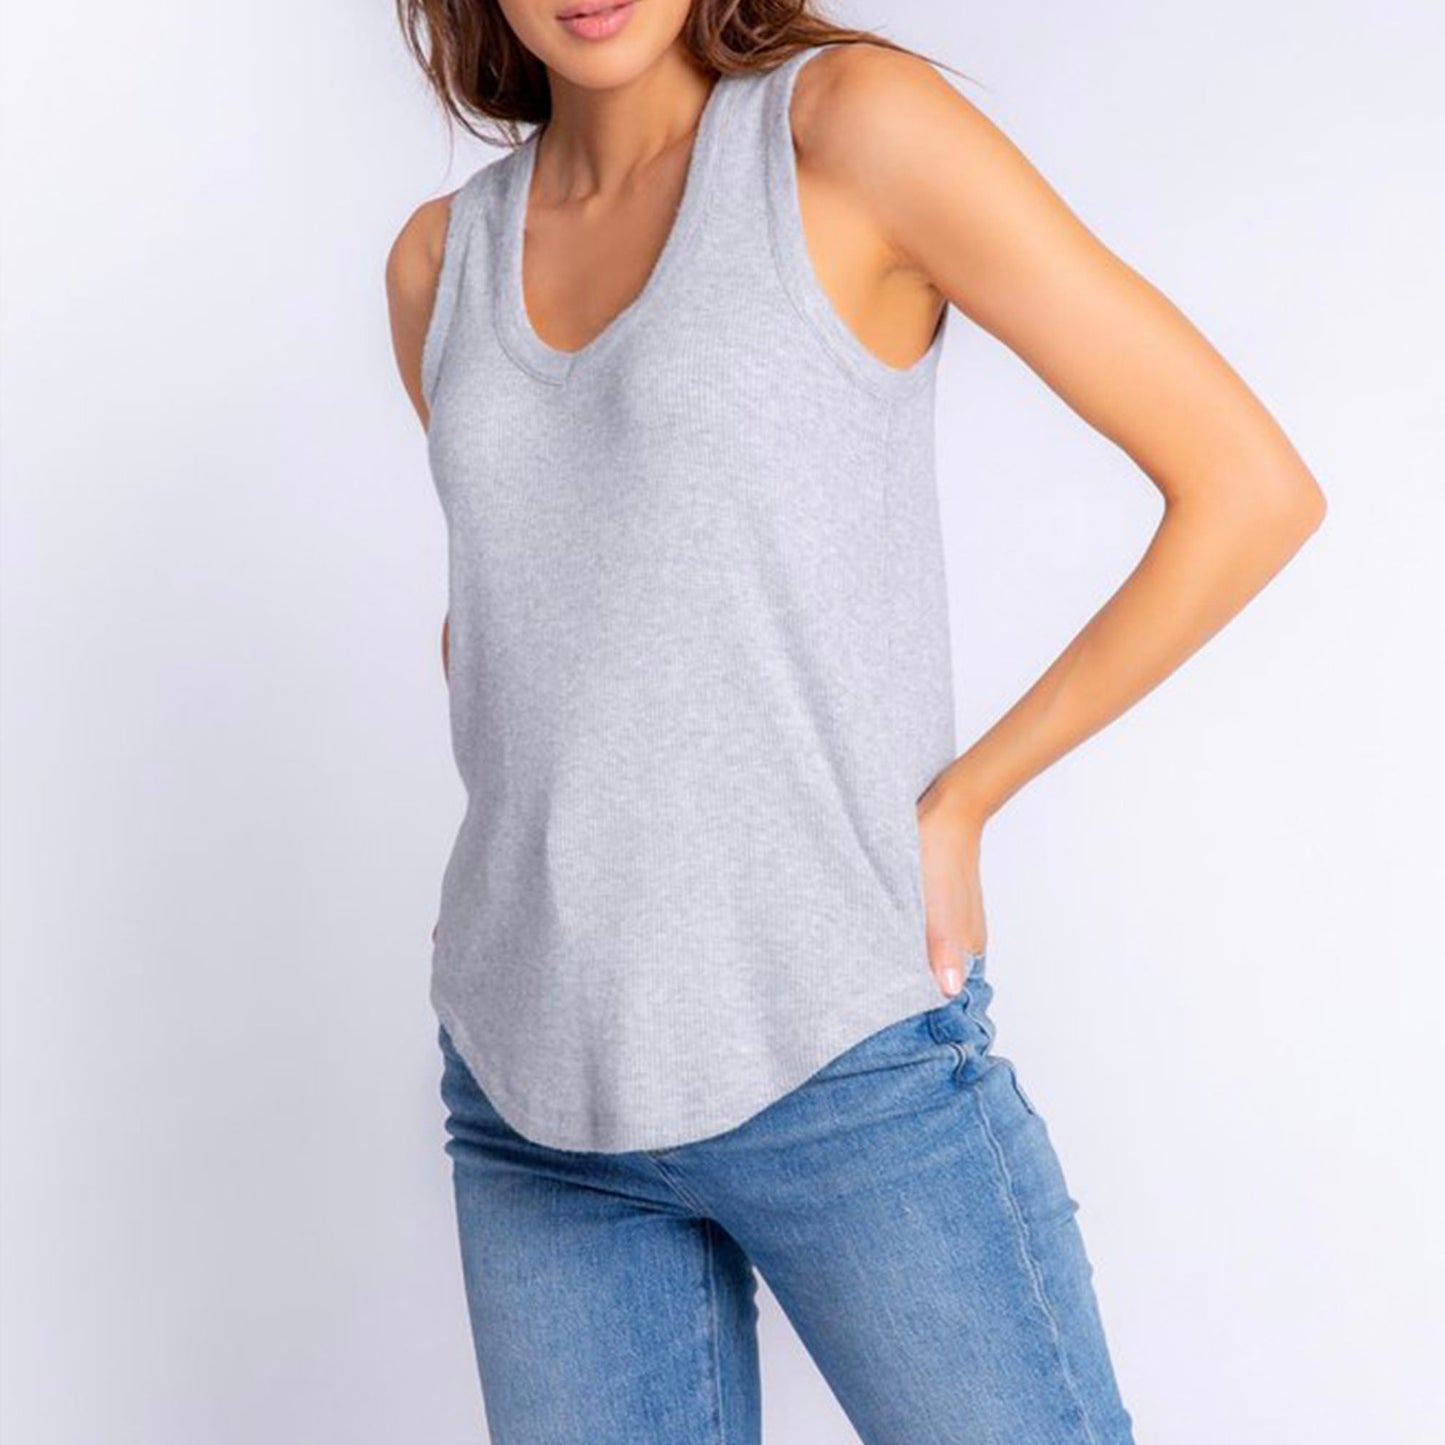 P.J. Salvage Textured Tank Top. An easy, wear-anywhere, layer-with-anything tank top. With a rounded V-neck in soft 2x2 rib peachy jersey. Easy to wear out or give a casual tuck.